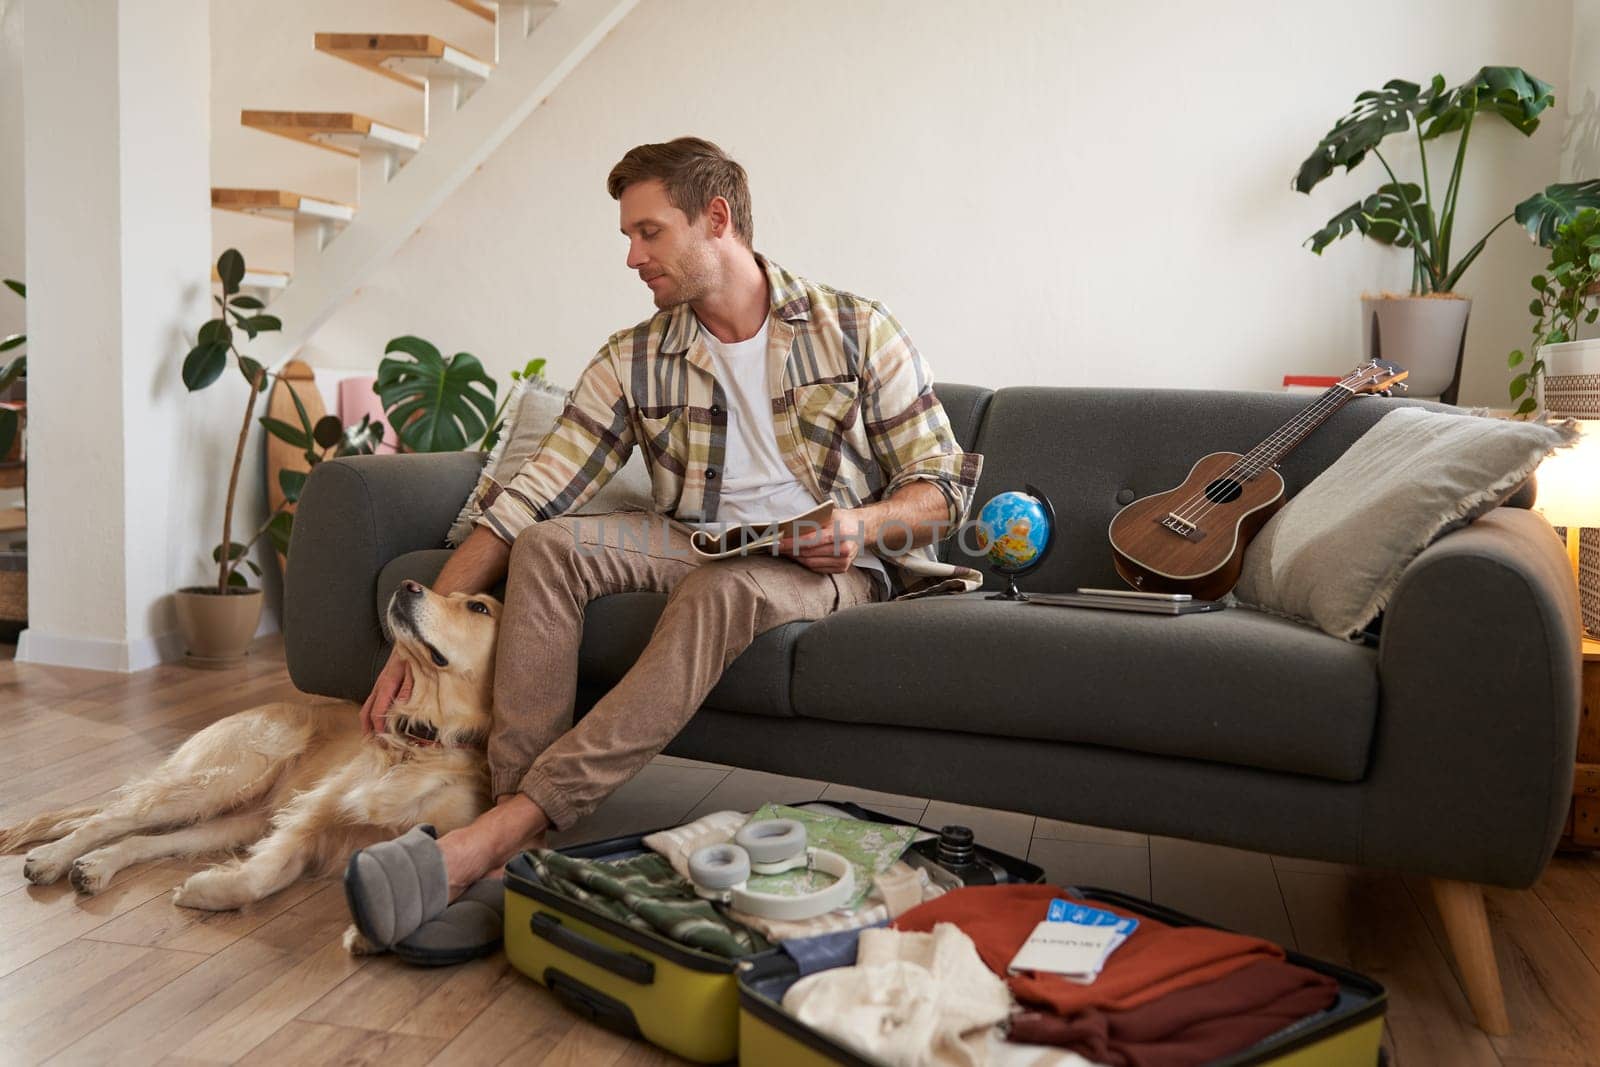 Portrait of young man packing for a trip, going on vacation, putting clothes inside suitcase, preparing for holiday.